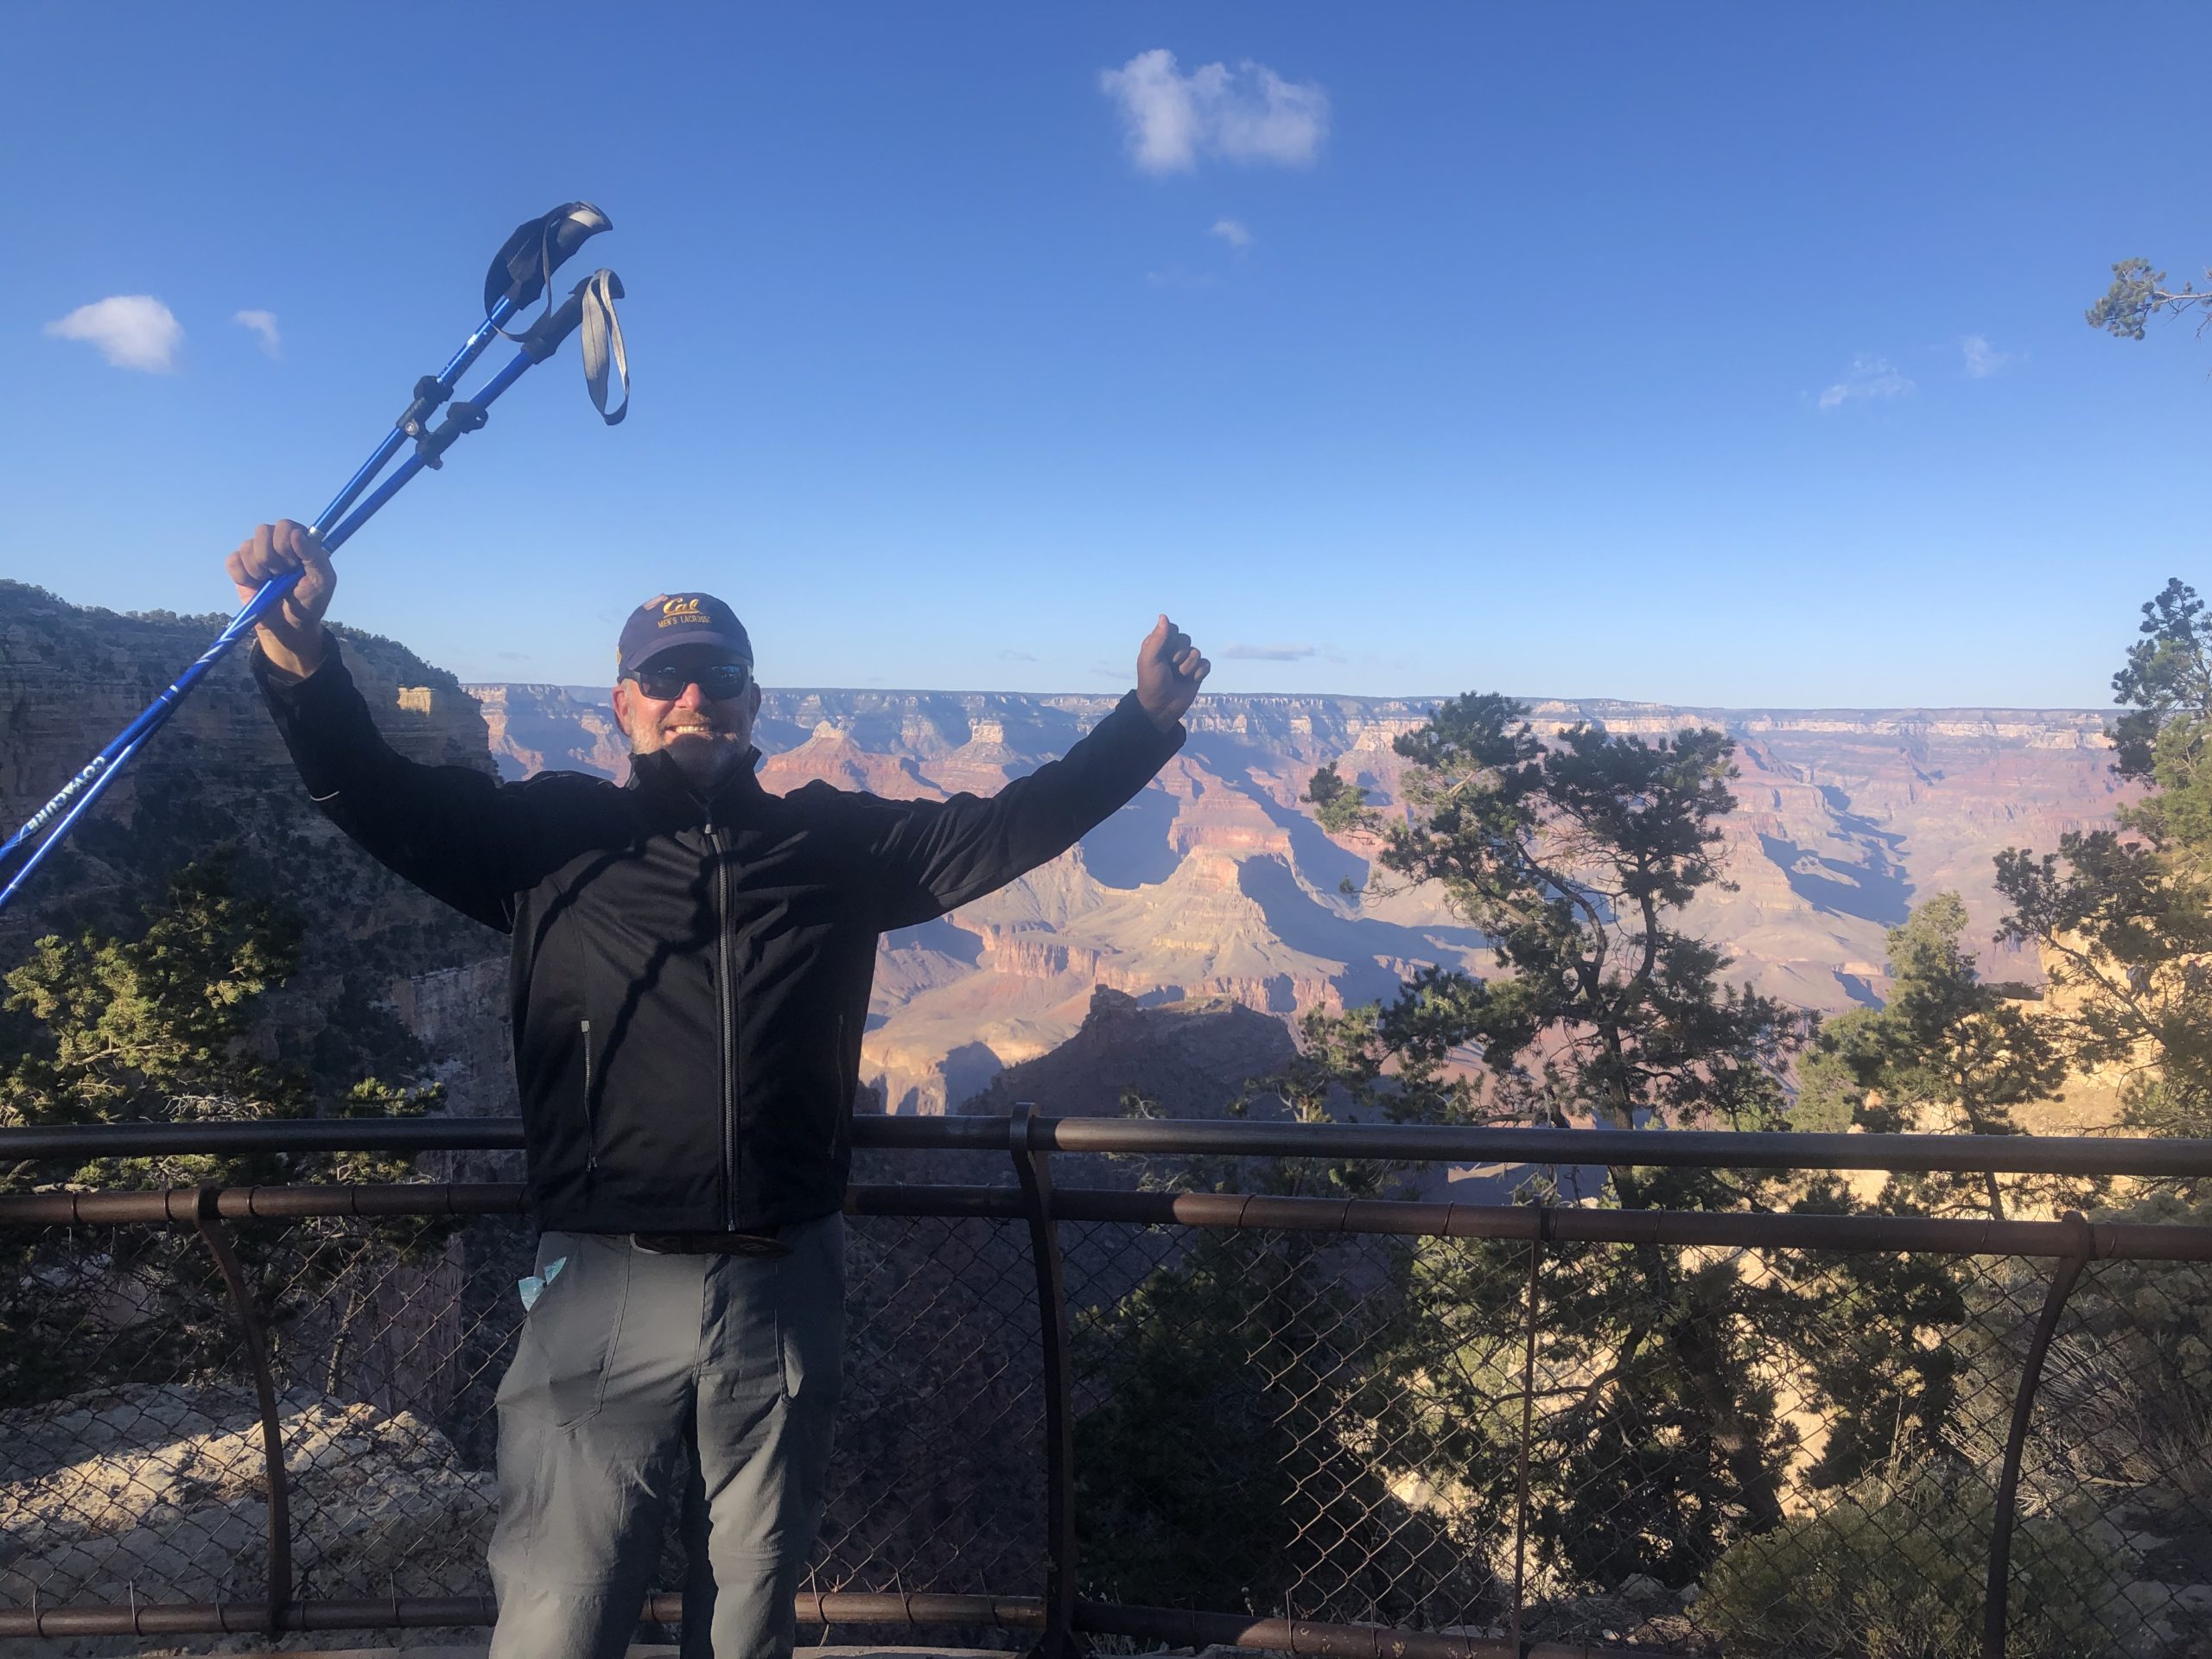 On south rim after successful rim to rim grand canyon with hiking poles and hiking backpack.